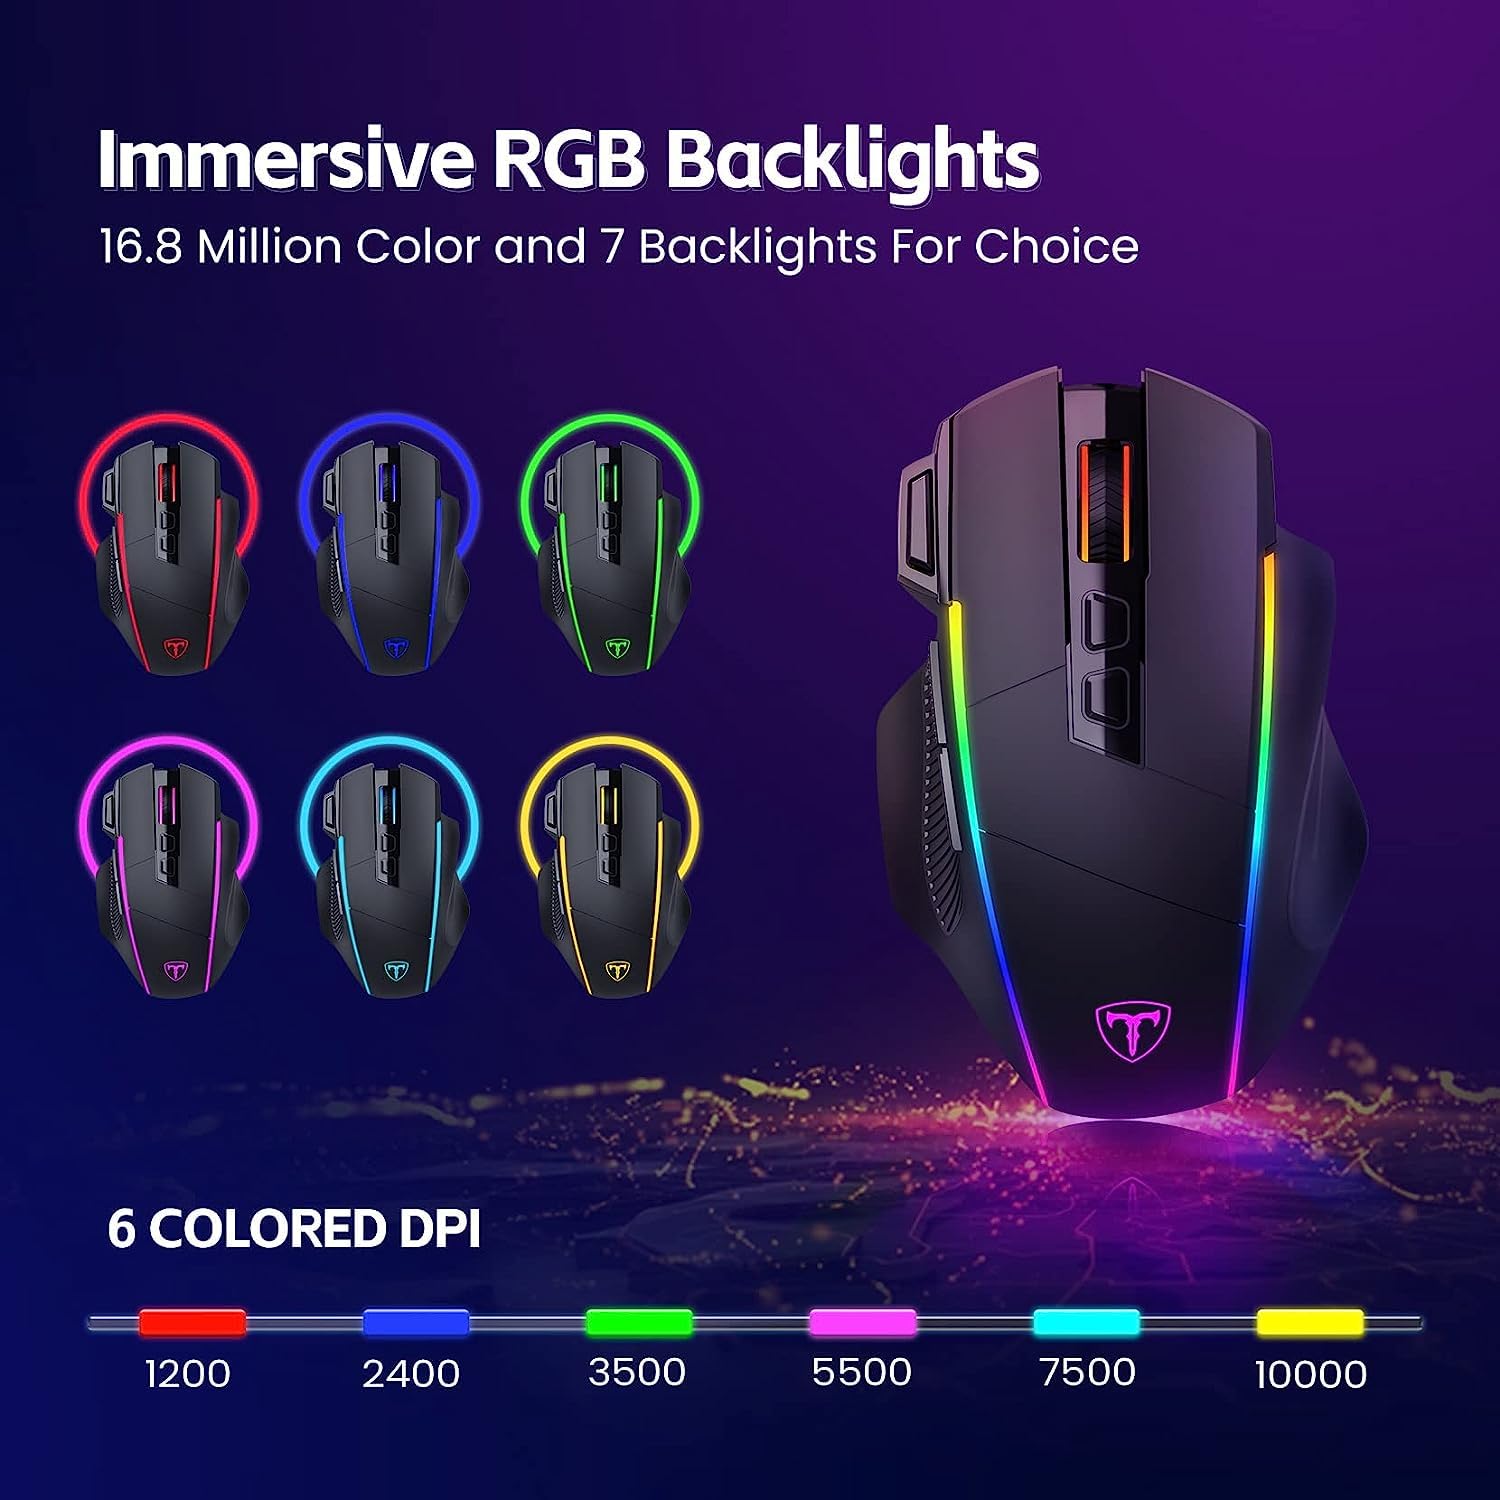 RisoPhy Wireless Gaming Mouse,Tri-Mode 2.4G/USB-C/Bluetooth Mouse Up to 10000DPI,Chroma RGB Backlit,Ergonomic Mouse with 8 Programmable Buttons,Rechargeable Wireless Computer Mouse for Laptop,PC,Mac